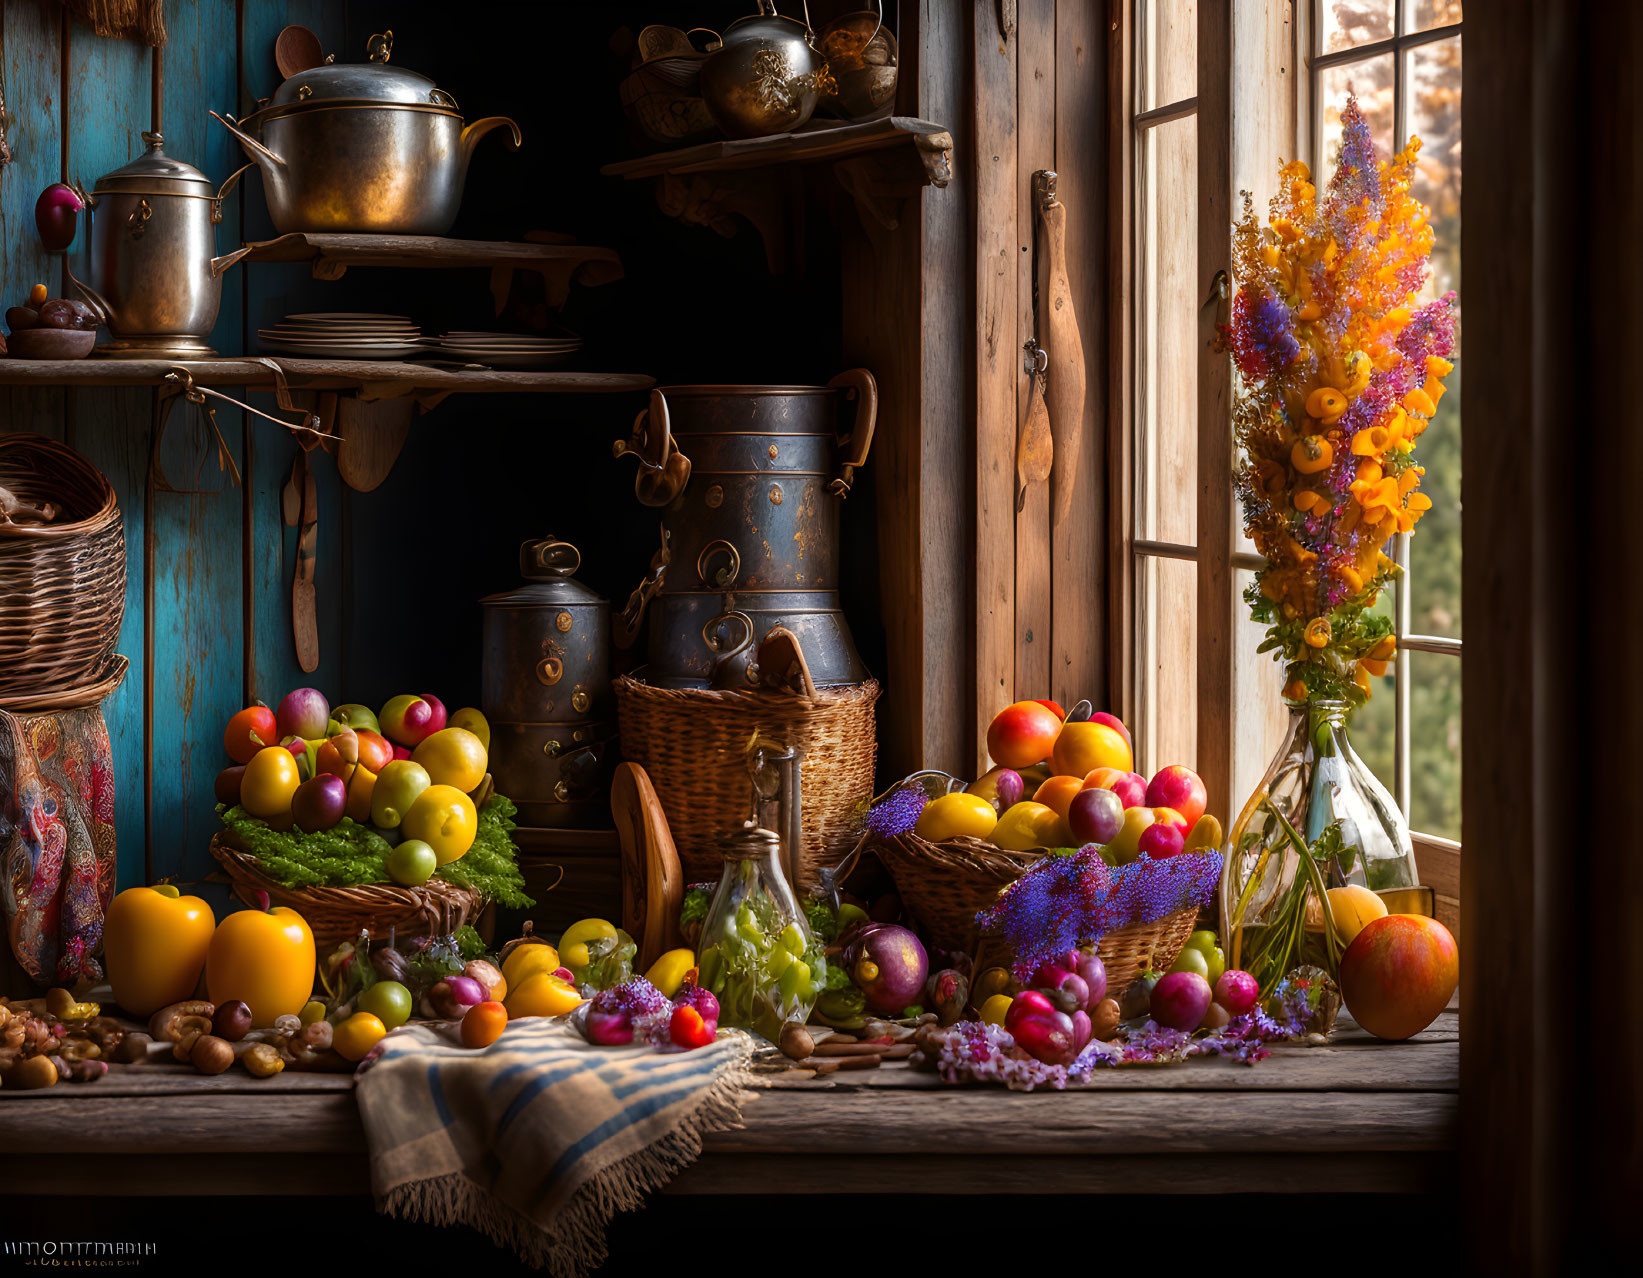 Rustic kitchen window with abundant fruits, wicker baskets, copper pots, and autumn foliage in